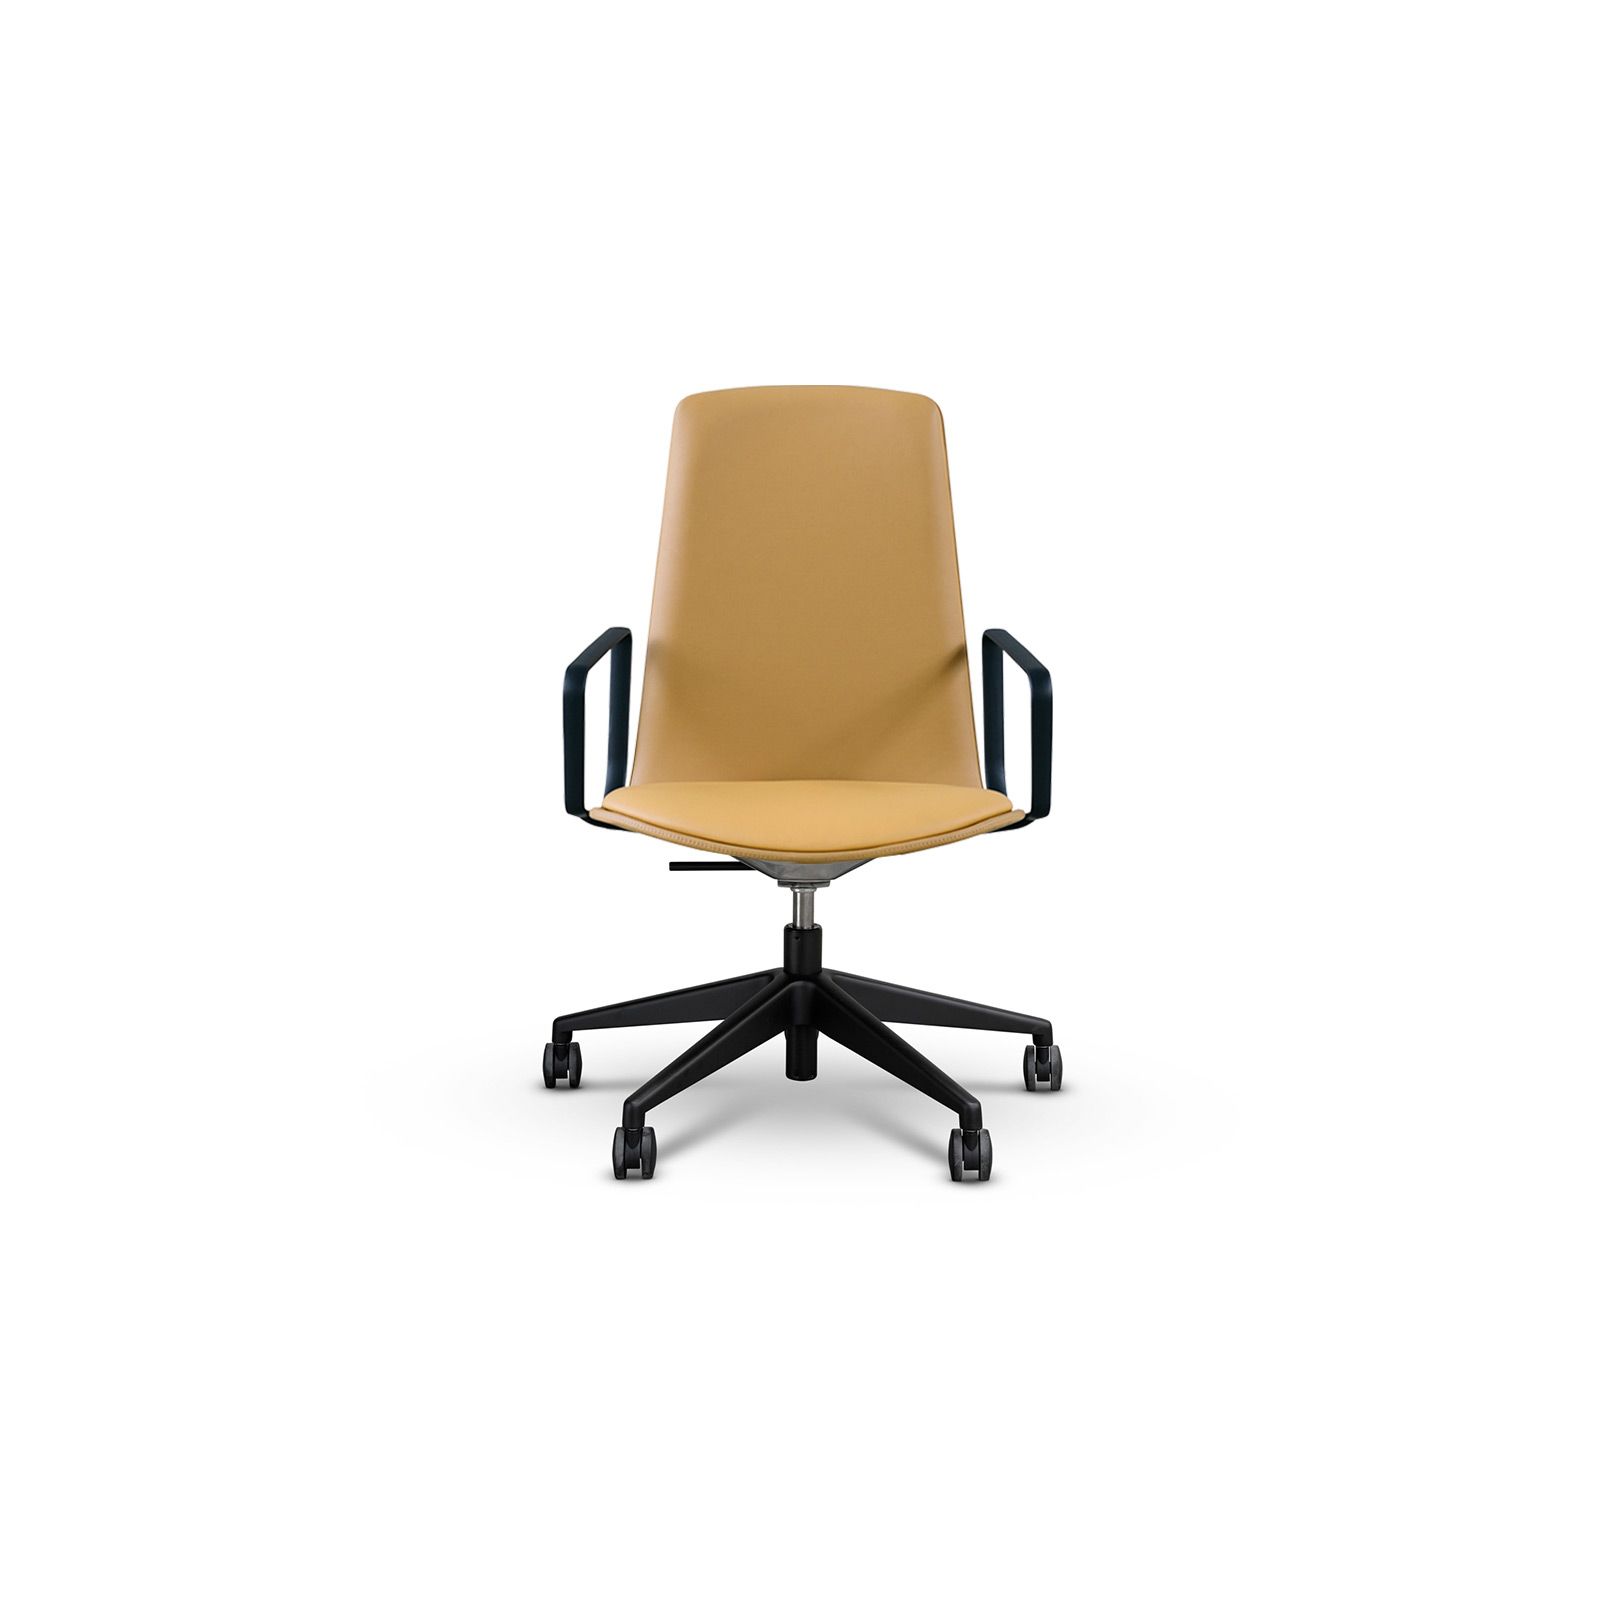 LOTTUS CONFERENCE CHAIR